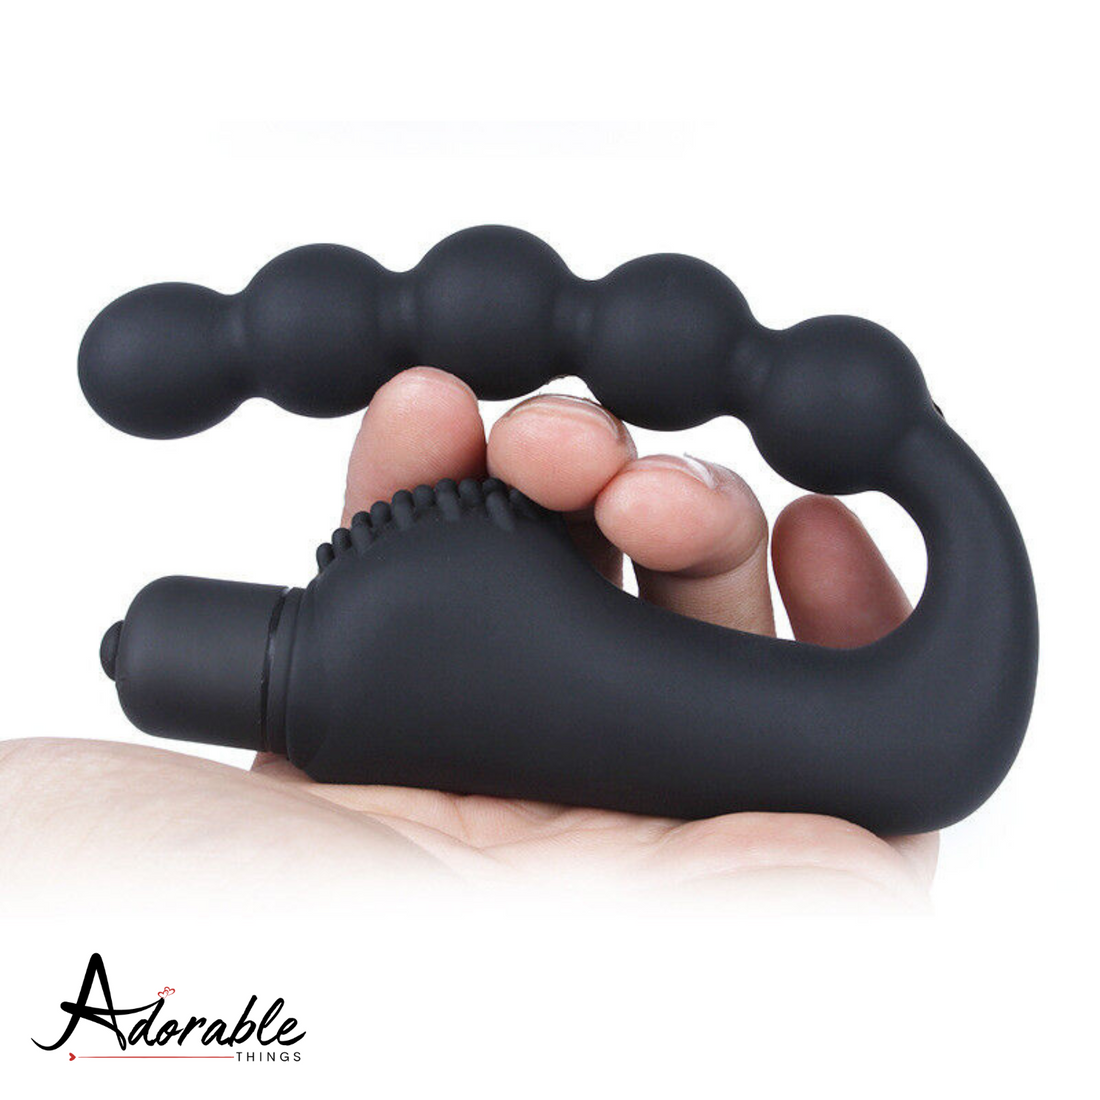 Adorable 55 Silicone Bullet Massager